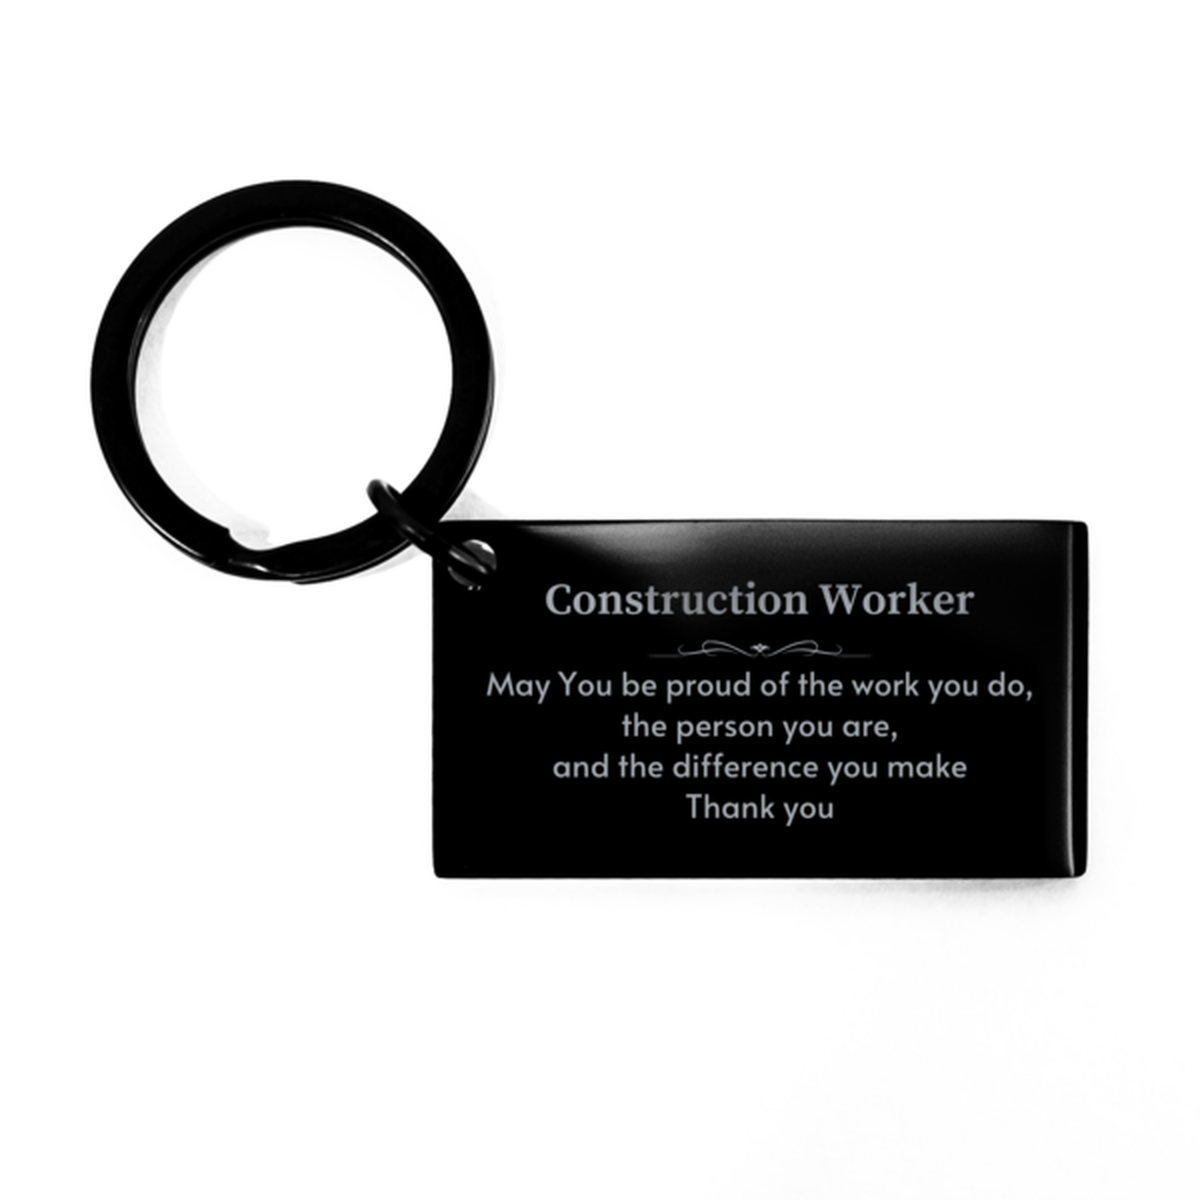 Heartwarming Keychain Retirement Coworkers Gifts for Construction Worker, Executive May You be proud of the work you do, the person you are Gifts for Boss Men Women Friends